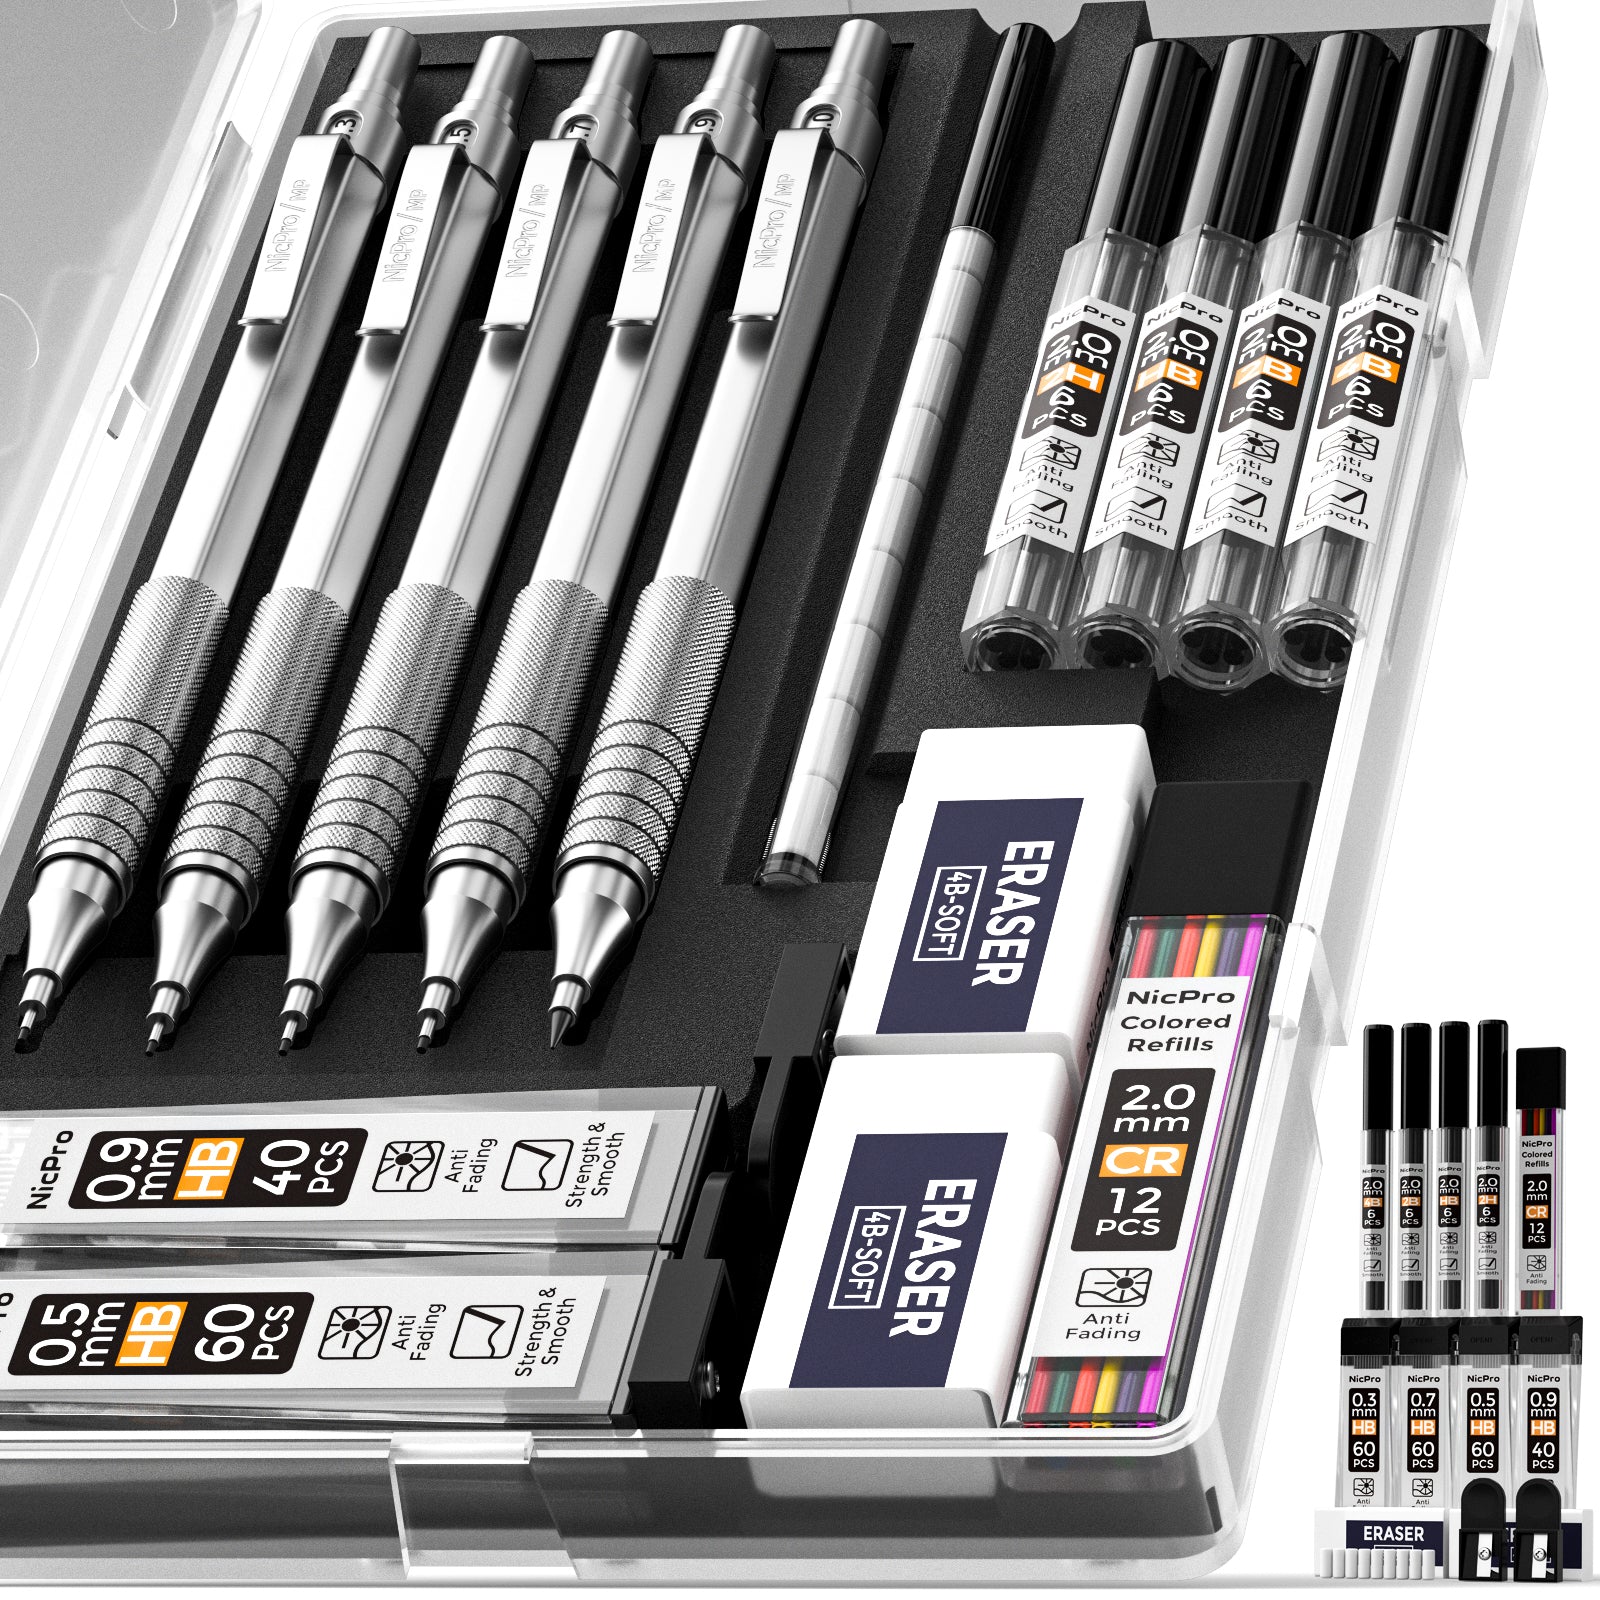 Nicpro 6 PCS Art Mechanical Pencils Set with Case, Drafting Pencil 0.3